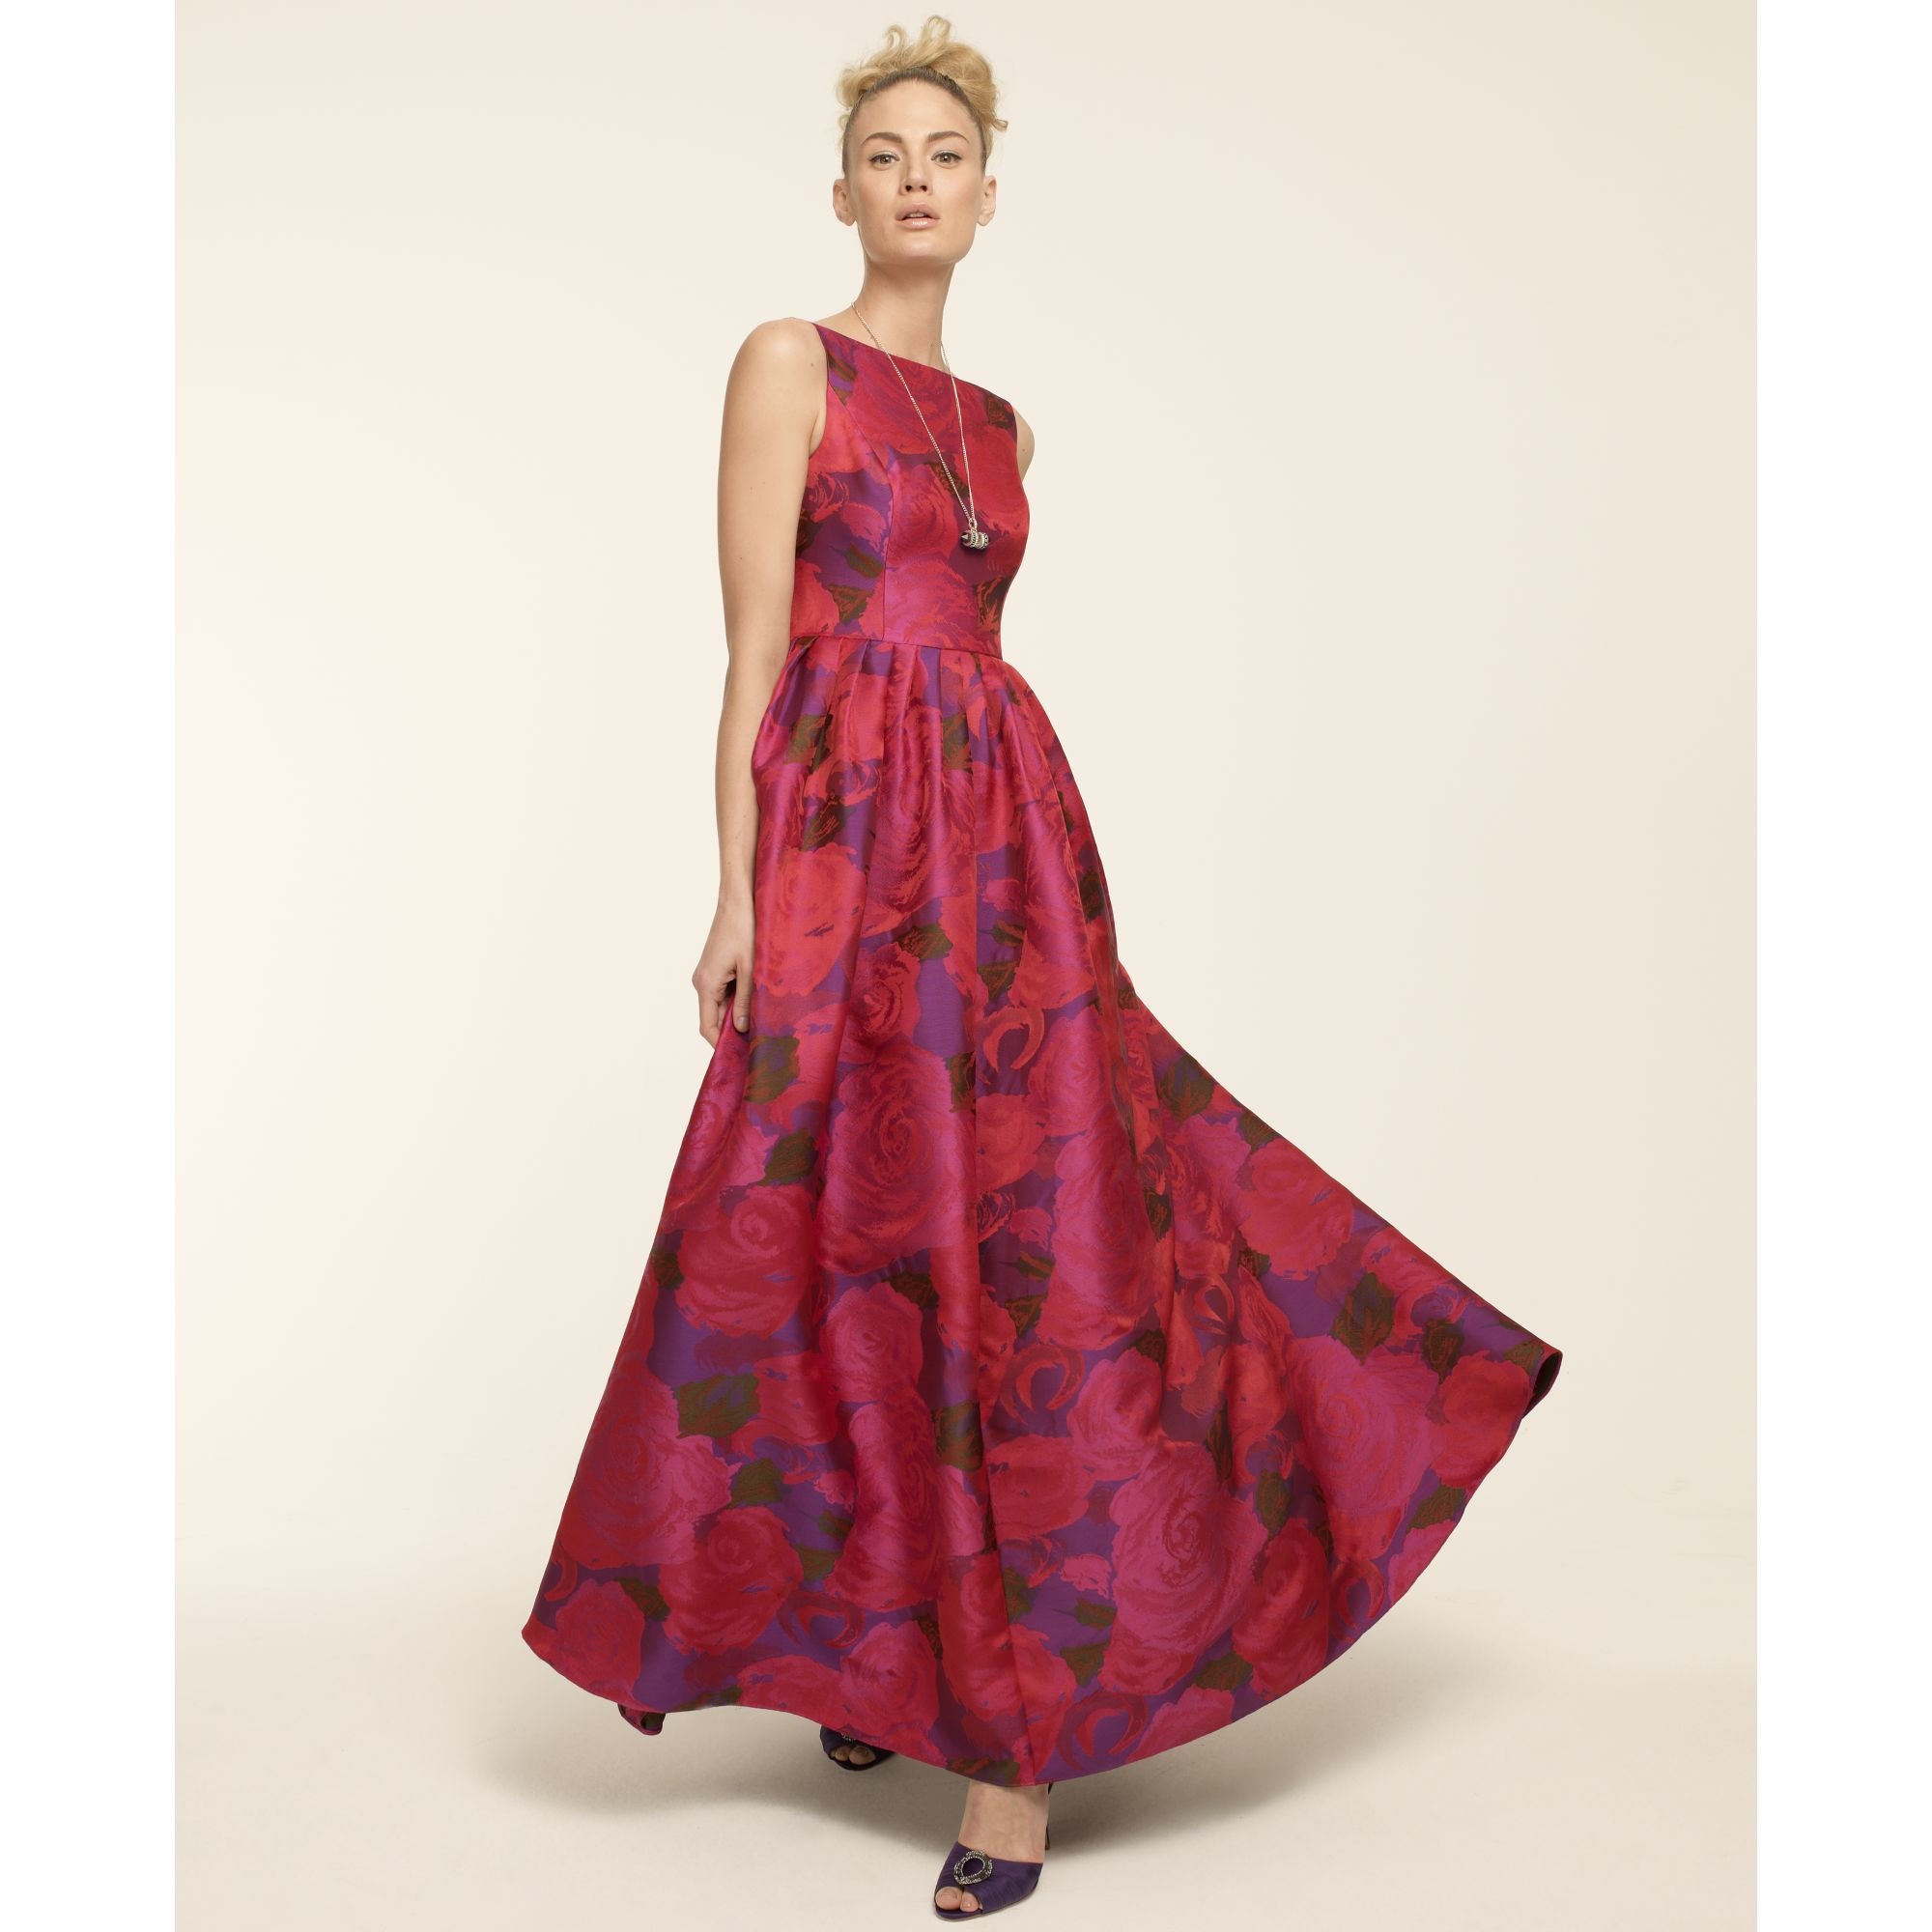 Adrianna Papell Sleeveless Floralprint Ball Gown in Magenta (Red) - Lyst